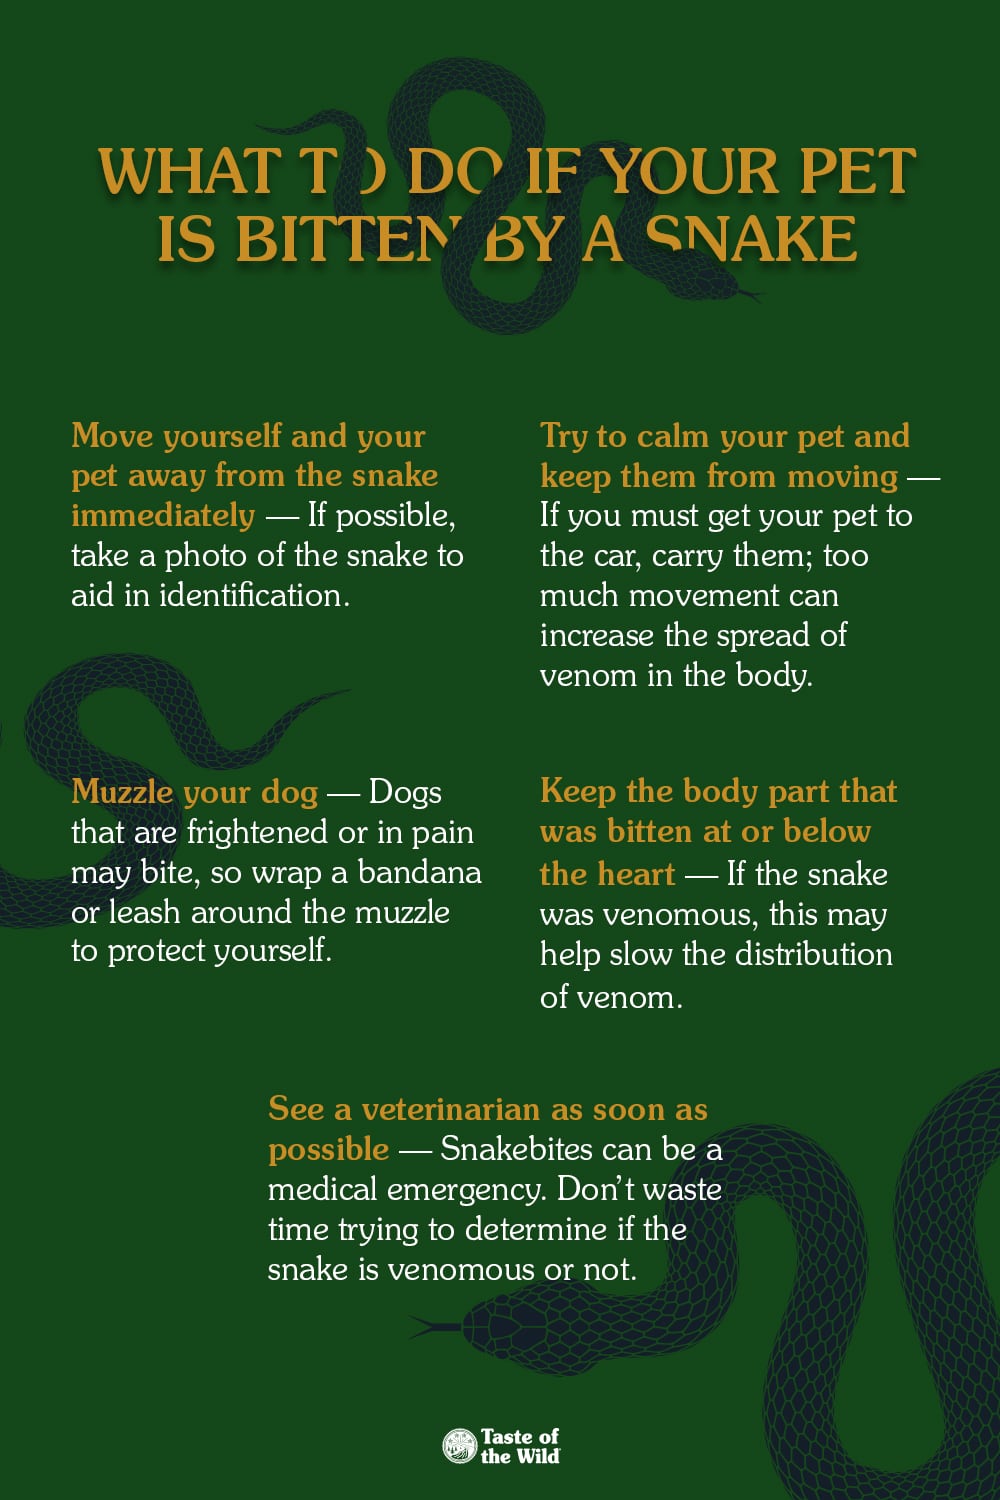 What to Do if Your Dog Is Bitten by a Snake Infographic | Taste of the Wild